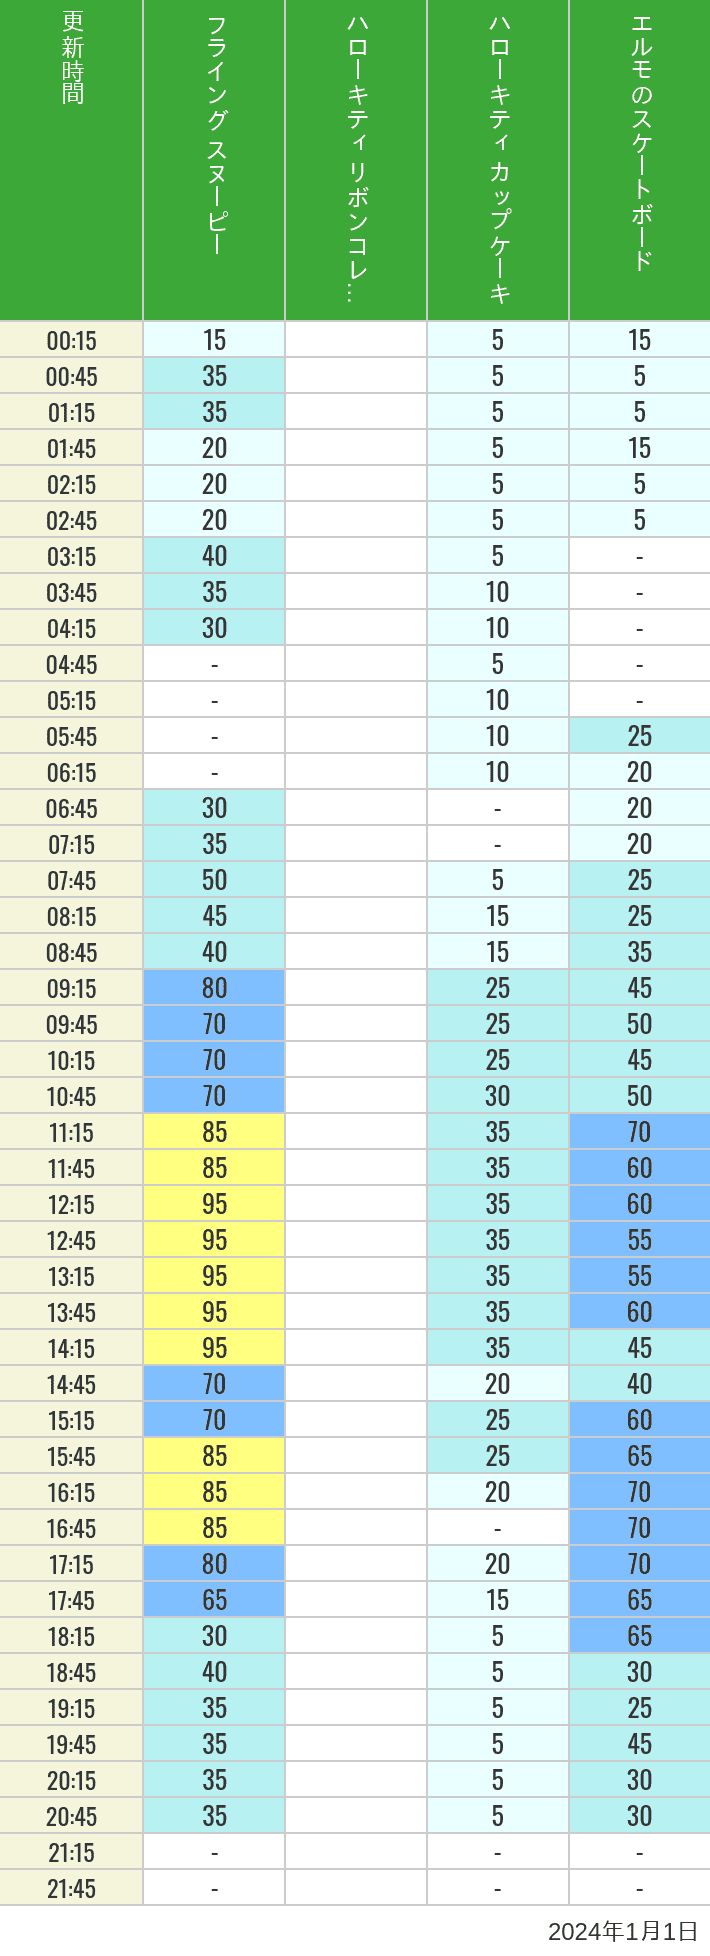 Table of wait times for Flying Snoopy, Hello Kitty Ribbon, Kittys Cupcake and Elmos Skateboard on January 1, 2024, recorded by time from 7:00 am to 9:00 pm.